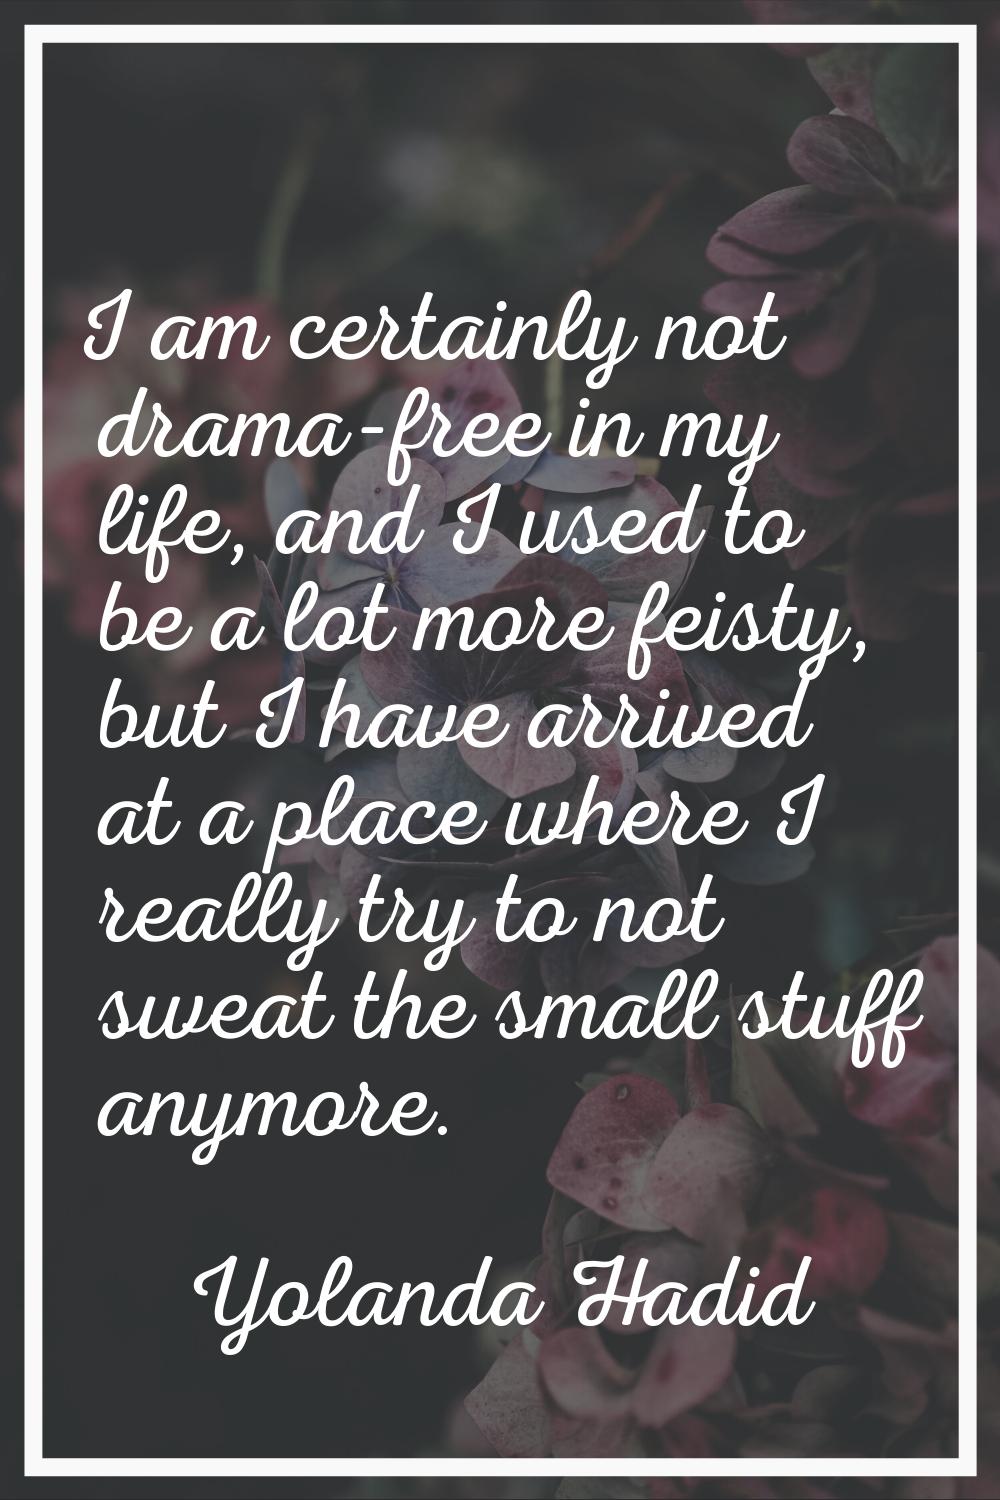 I am certainly not drama-free in my life, and I used to be a lot more feisty, but I have arrived at